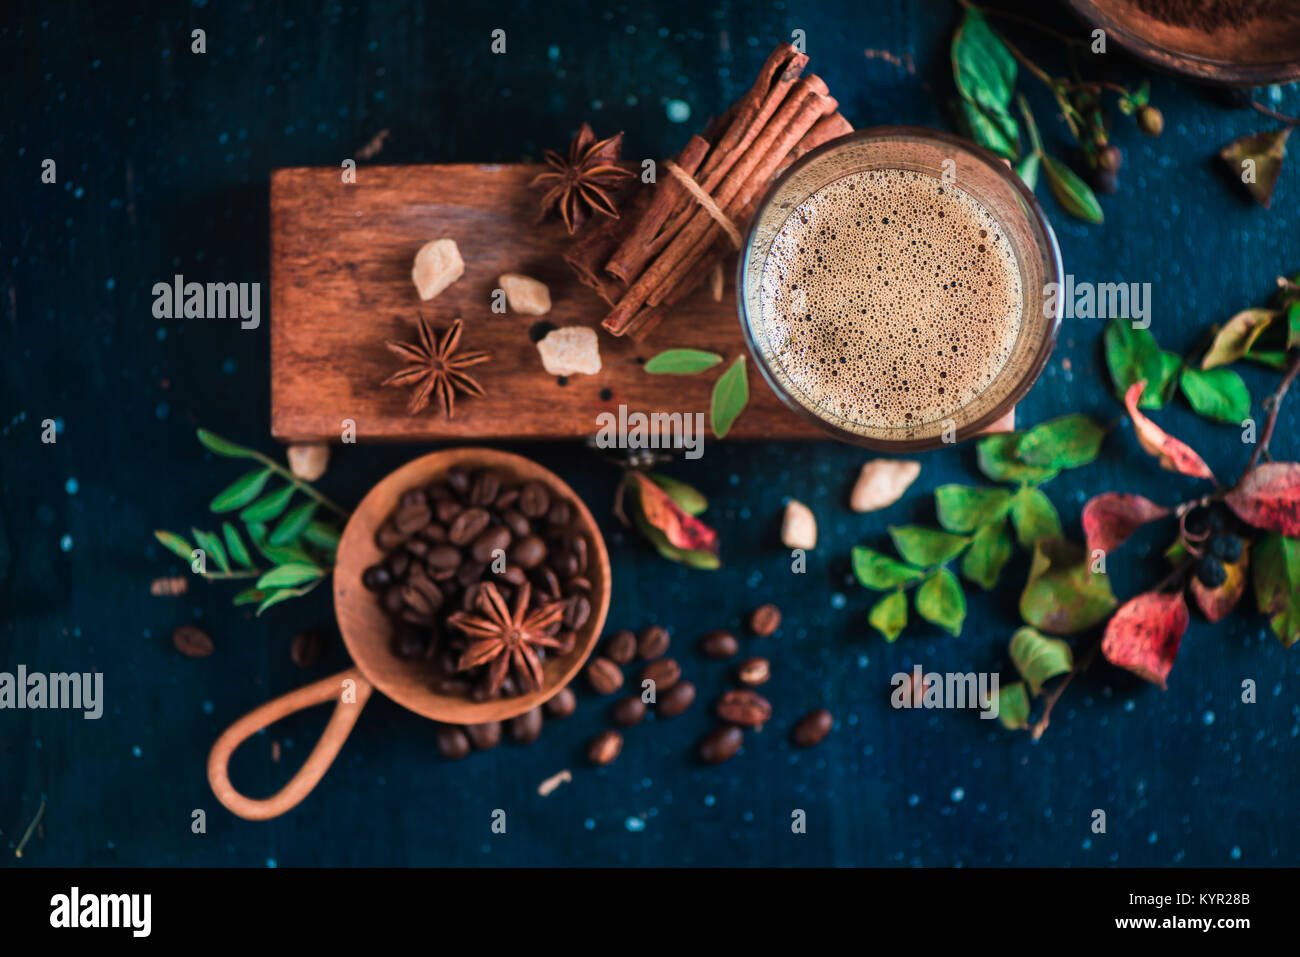 Flat lay with espresso shot with foam on a wooden box, coffee beans, arabica leaves, cinnamon and spices on dark background. Hot drink photography con Stock Photo